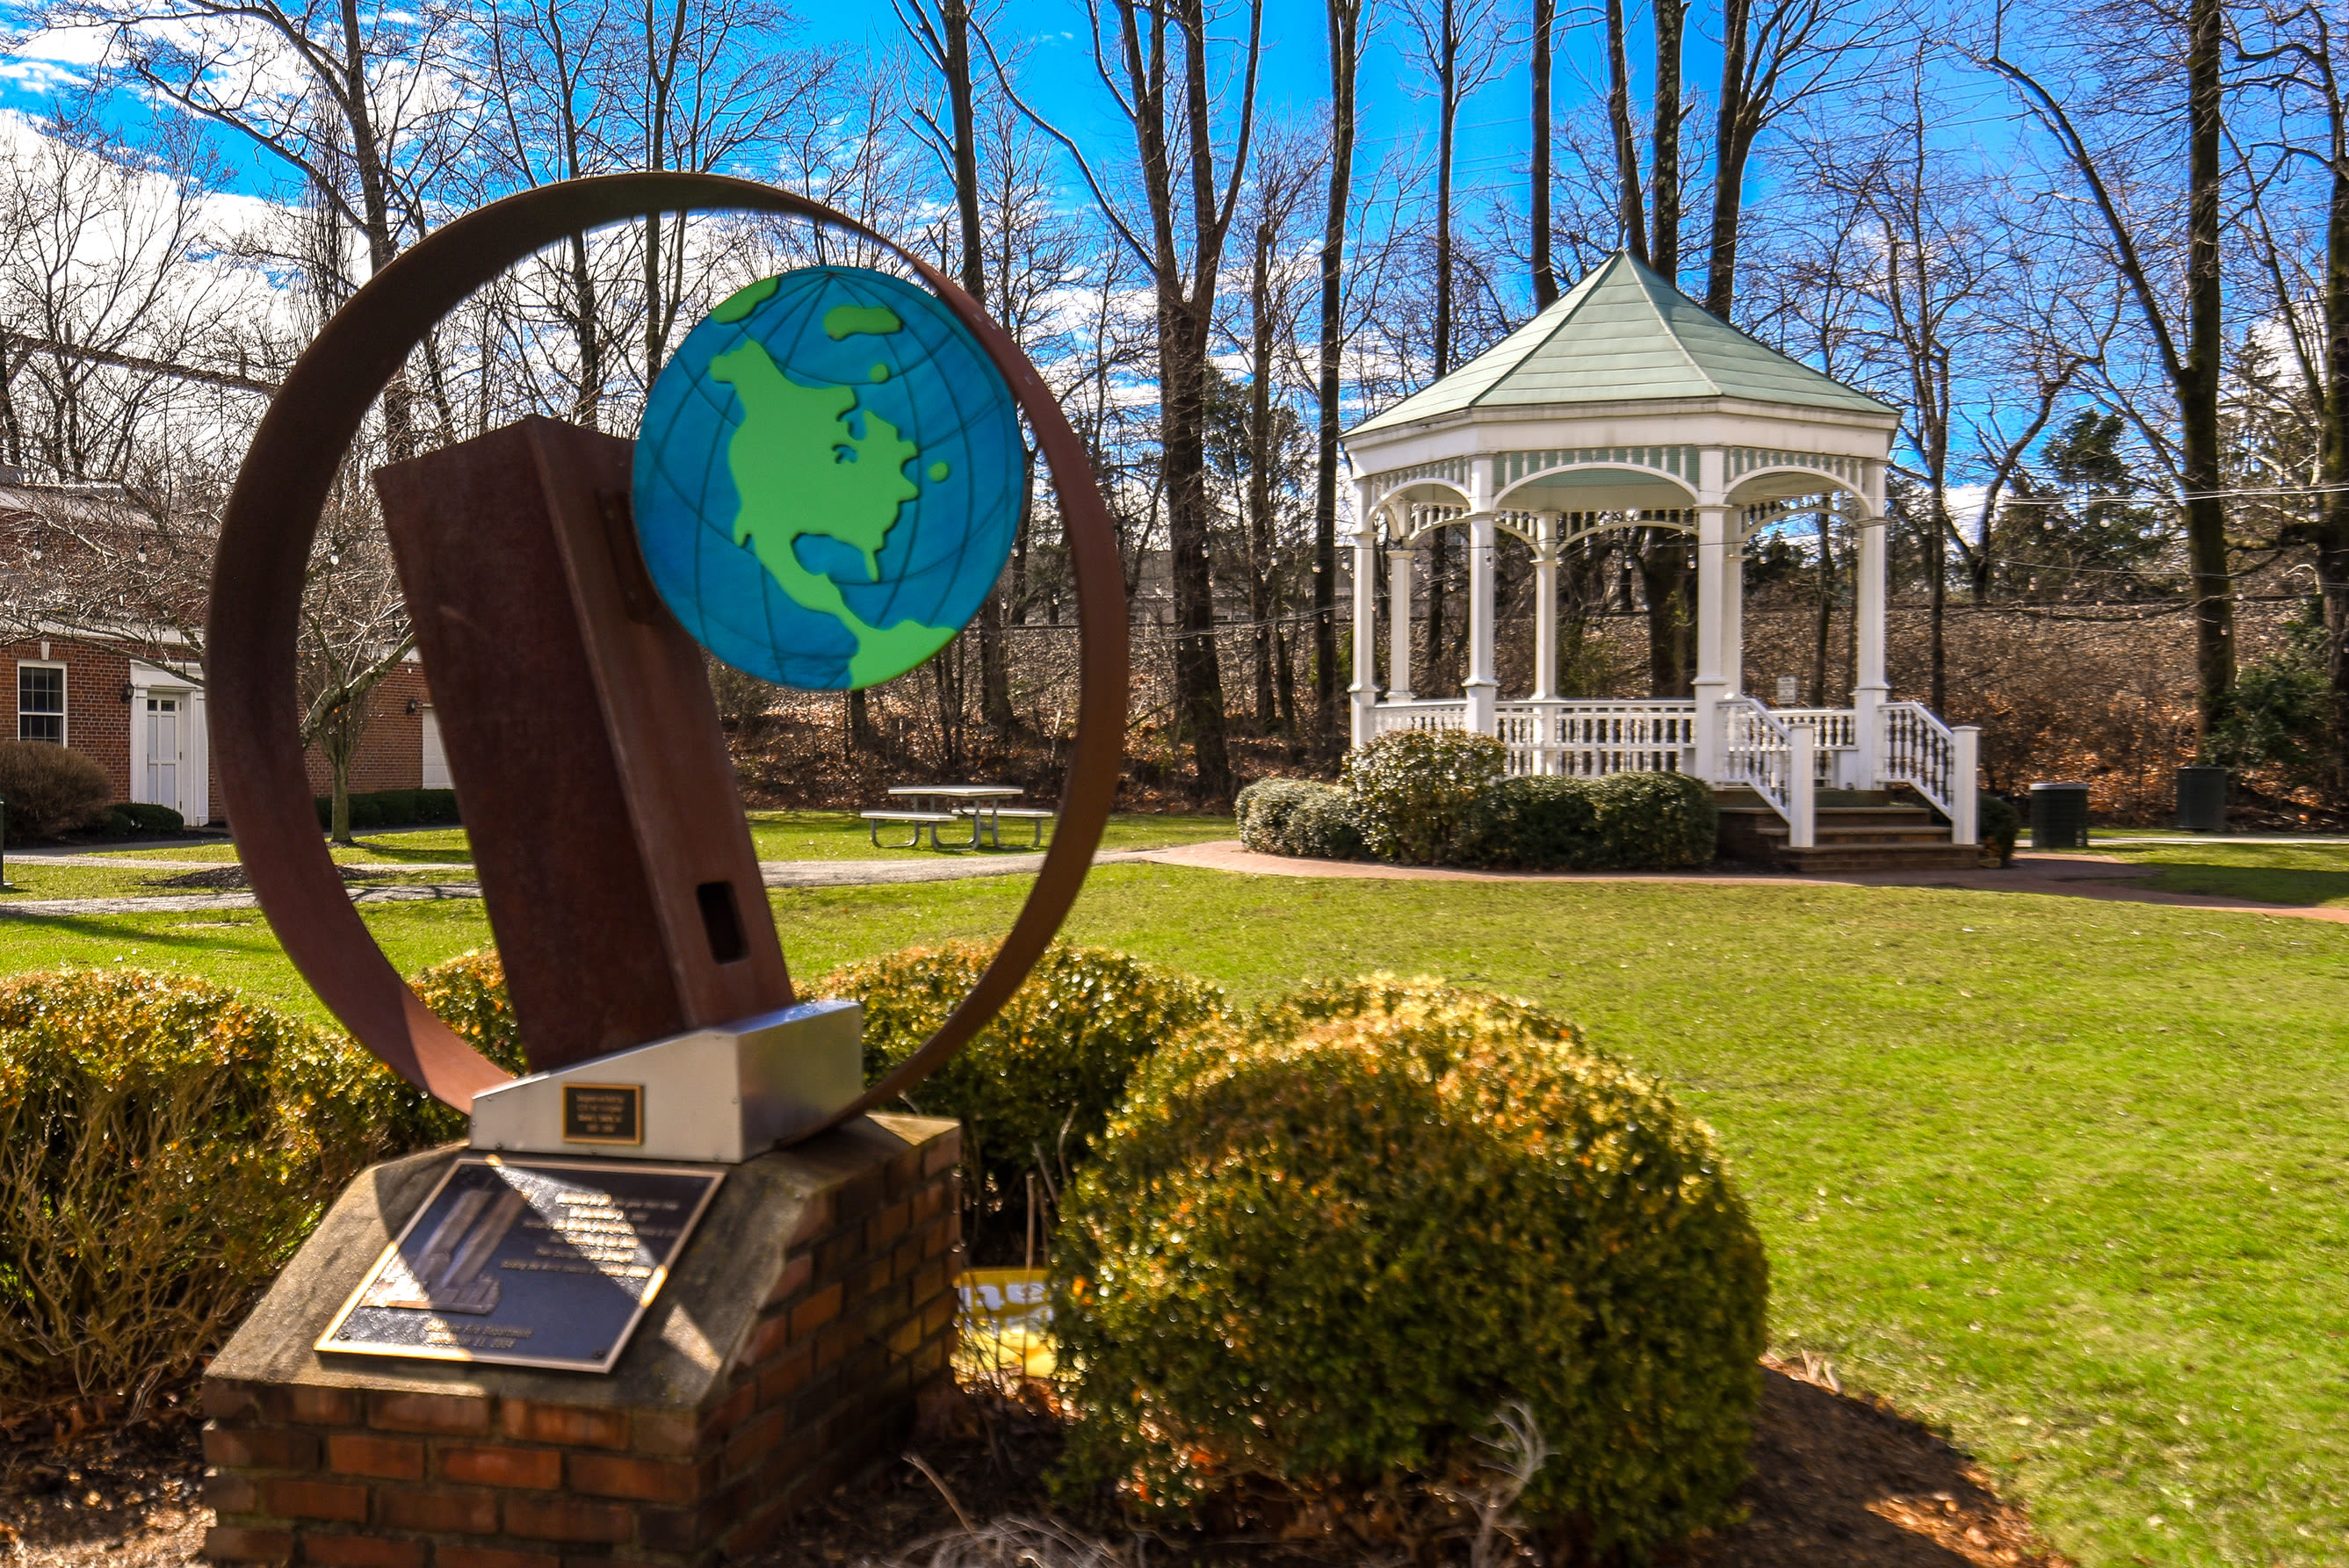 Sculpture and a gazebo on the grounds of Chatham on Main in Chatham, New Jersey